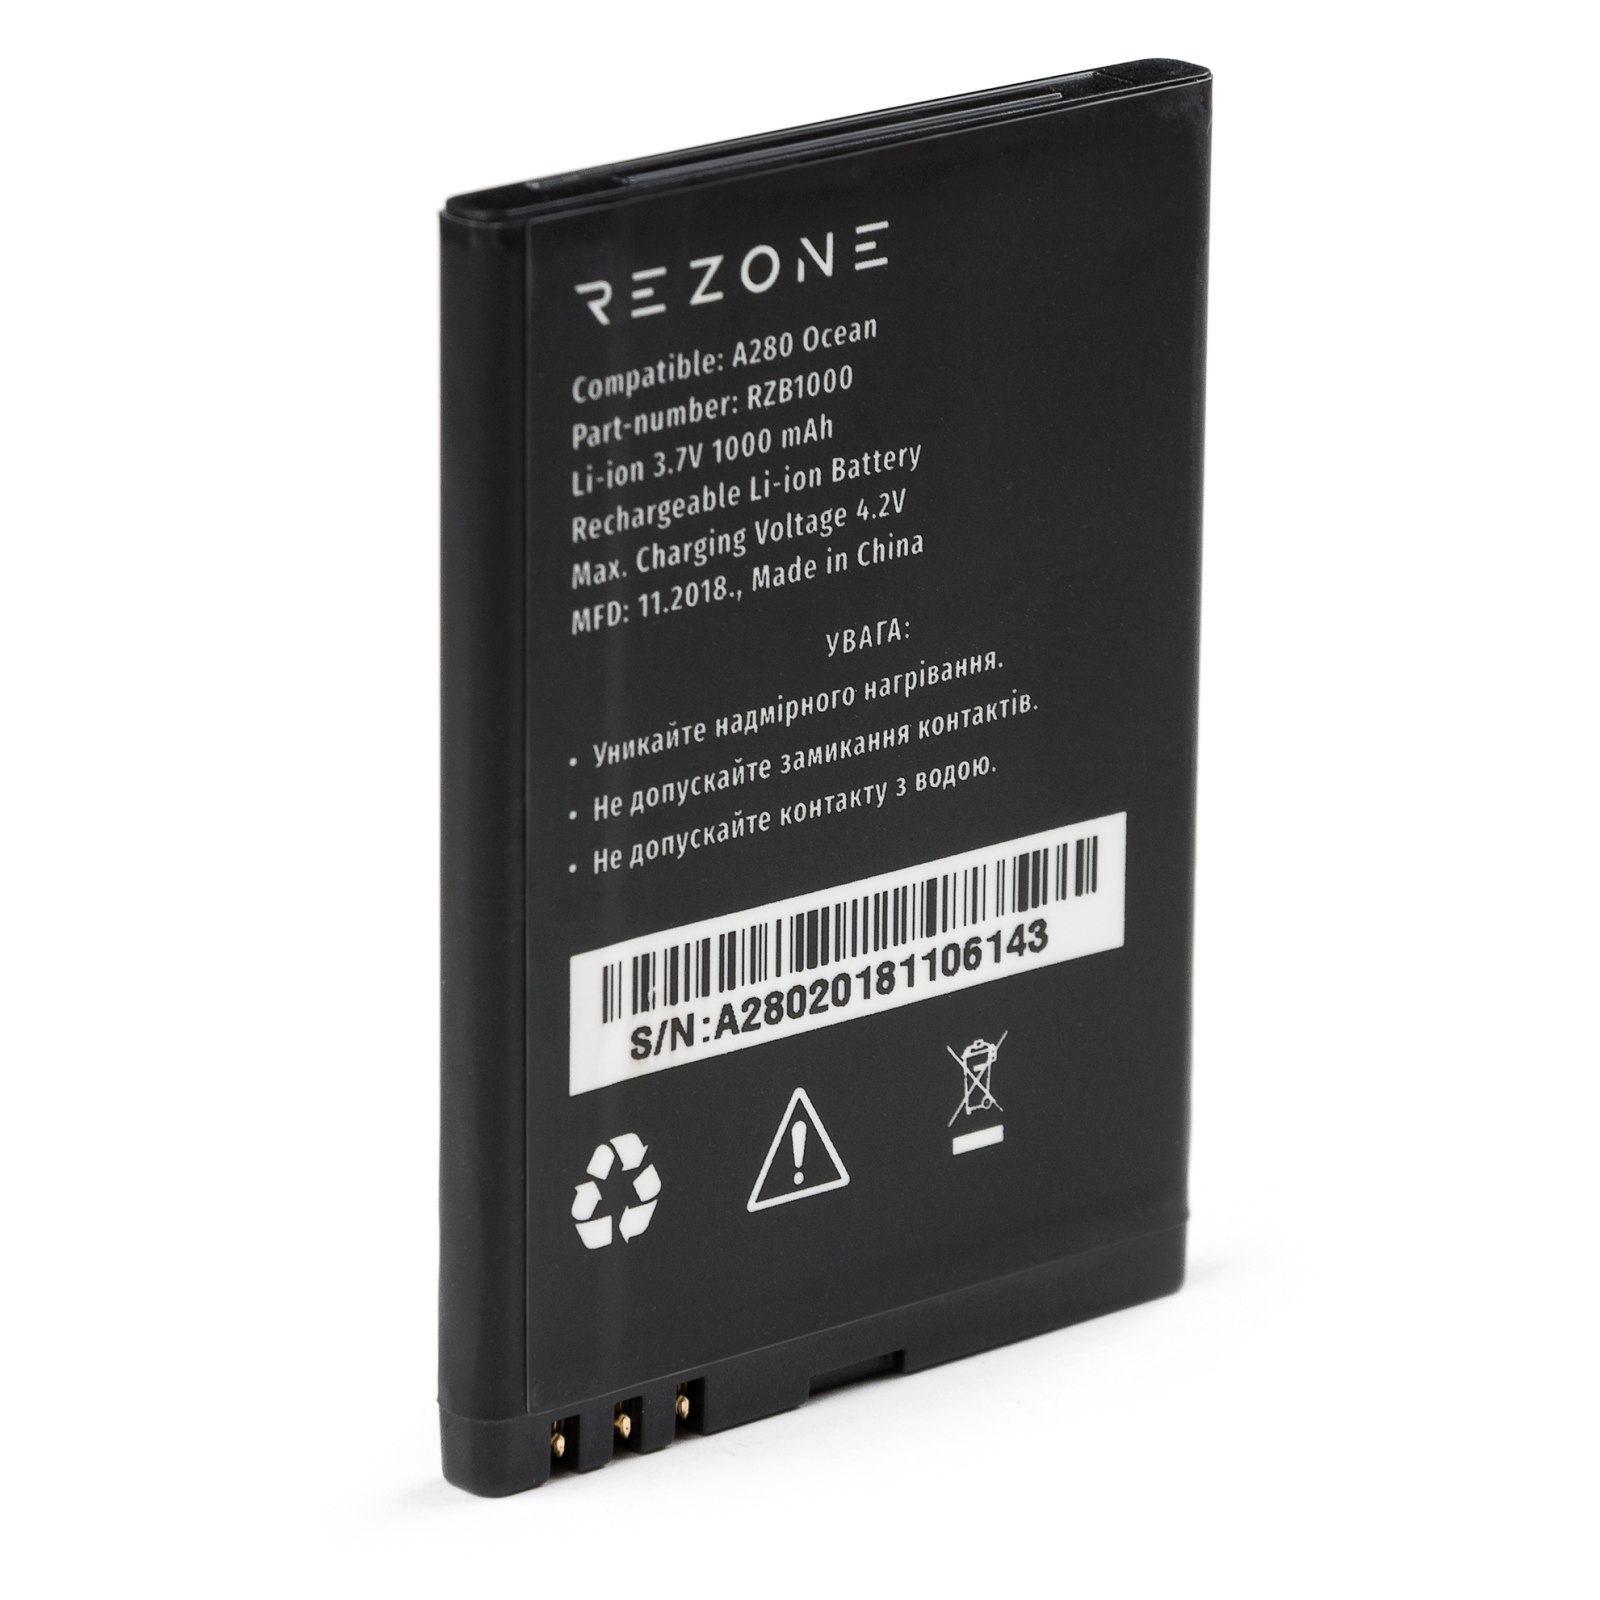 Аккумуляторная батарея Rezone for A280 Ocean 1000mah (and all compatible with BL-4D) (BL-4D) изображение 2